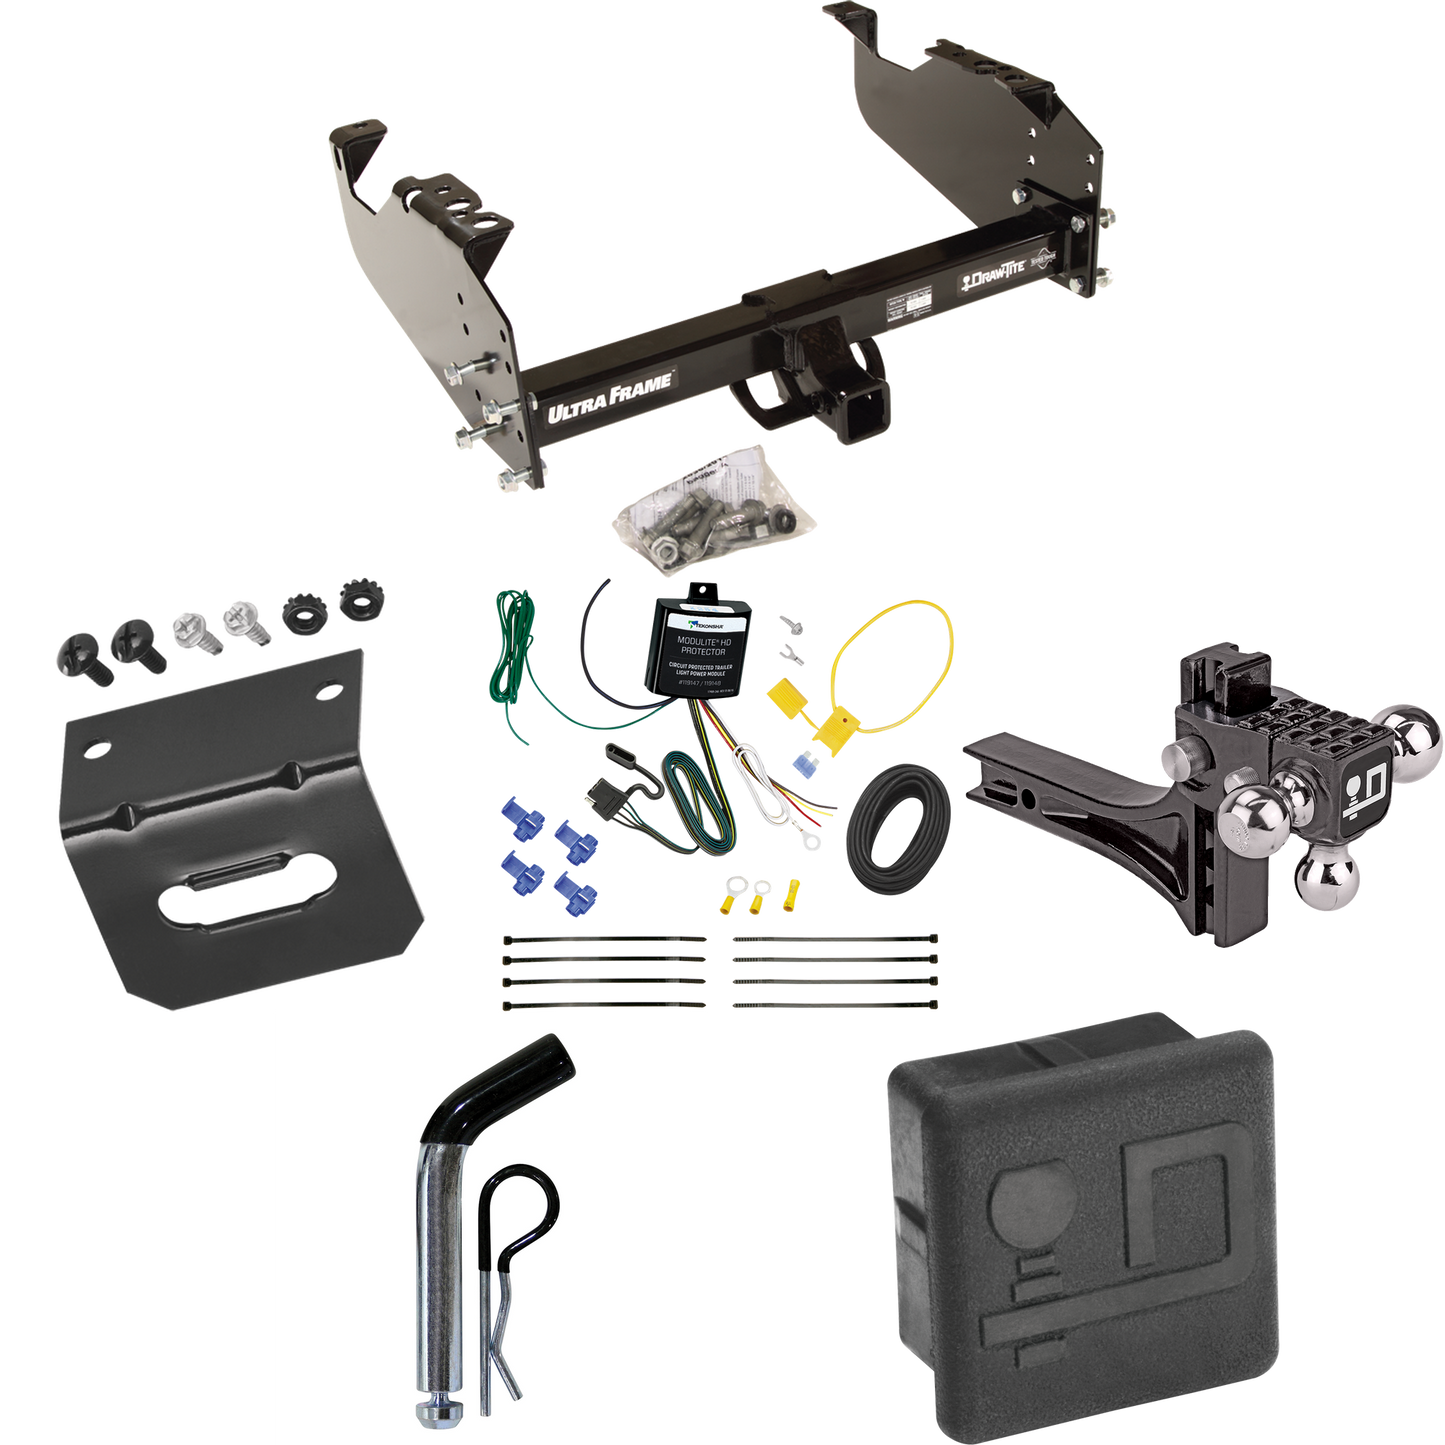 Fits 2007-2024 Chevrolet Silverado 3500 HD Trailer Hitch Tow PKG w/ 4-Flat Wiring Harness + Adjustable Drop Rise Triple Ball Ball Mount 1-7/8" & 2" & 2-5/16" Trailer Balls + Pin/Clip + Hitch Cover + Wiring Bracket (For Cab & Chassis, w/34" Wide Frame